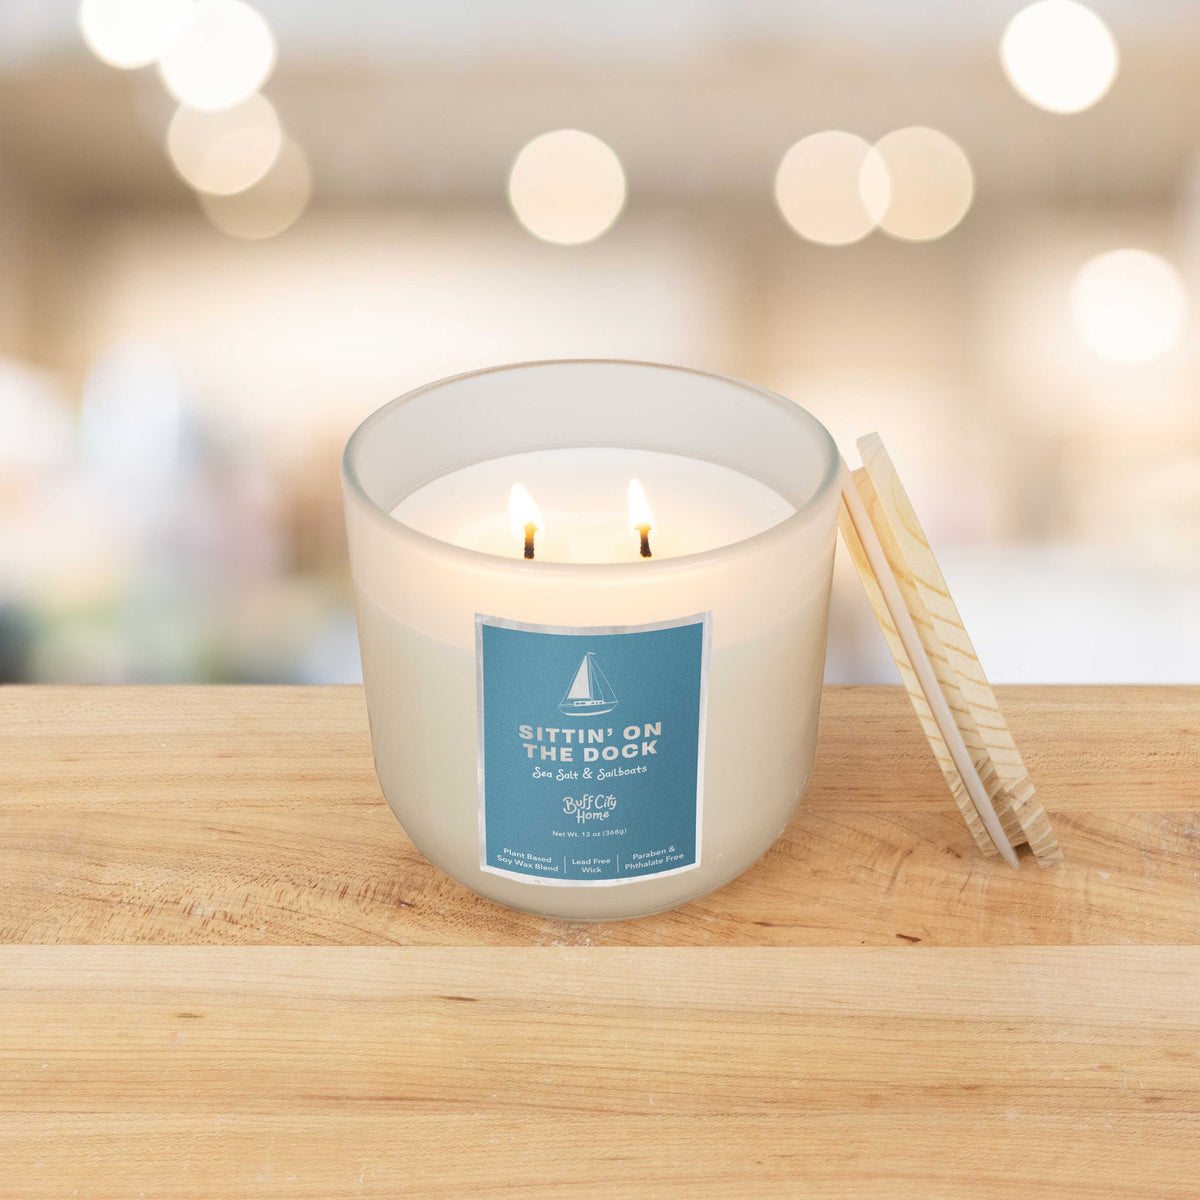 Sittin' On the Dock 2-Wick Candle